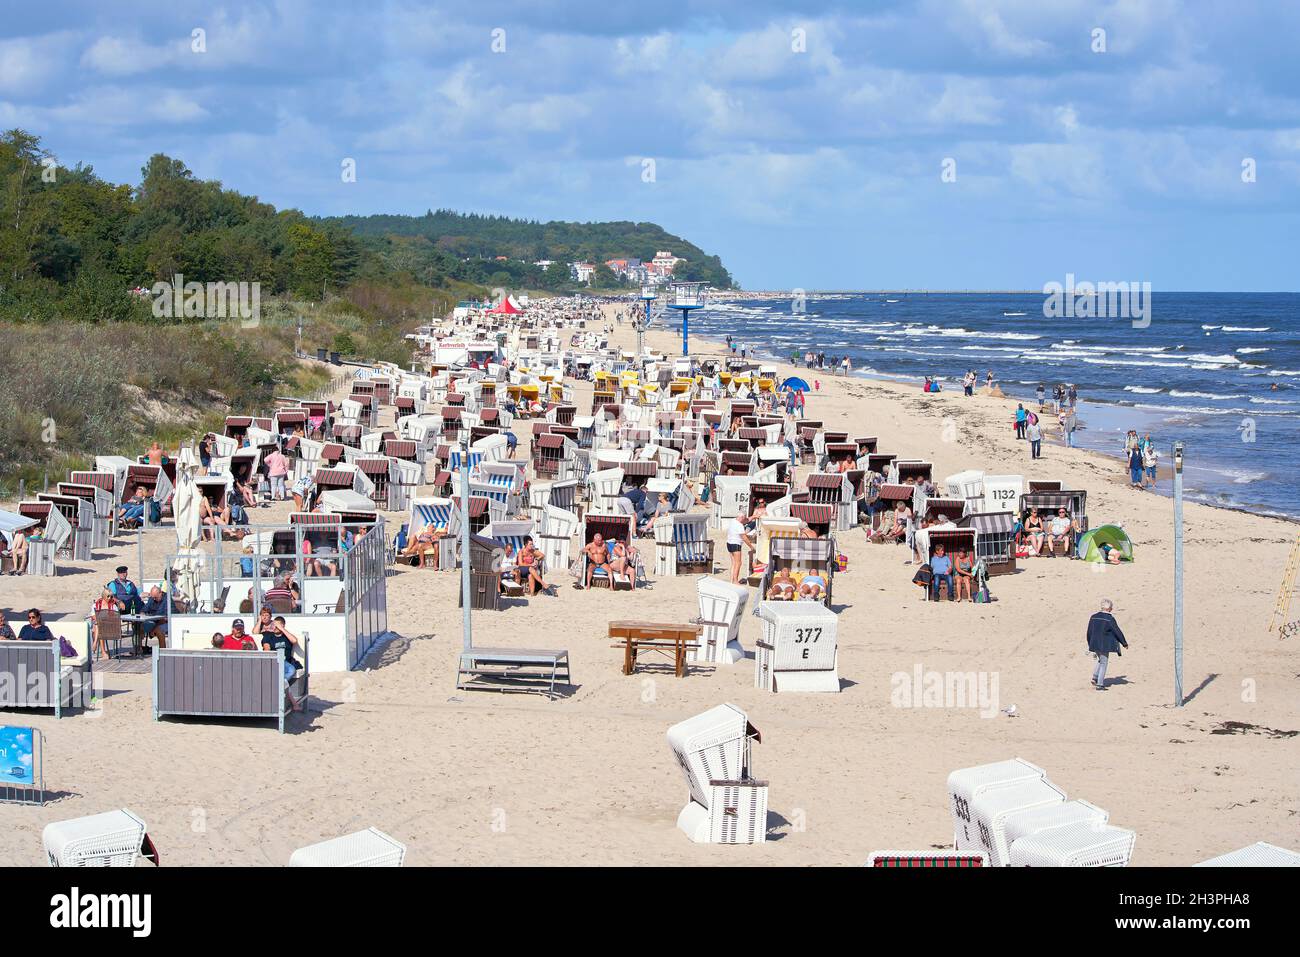 Holidaymakers on the crowded beach of Heringsdorf on the German Baltic Sea coast Stock Photo